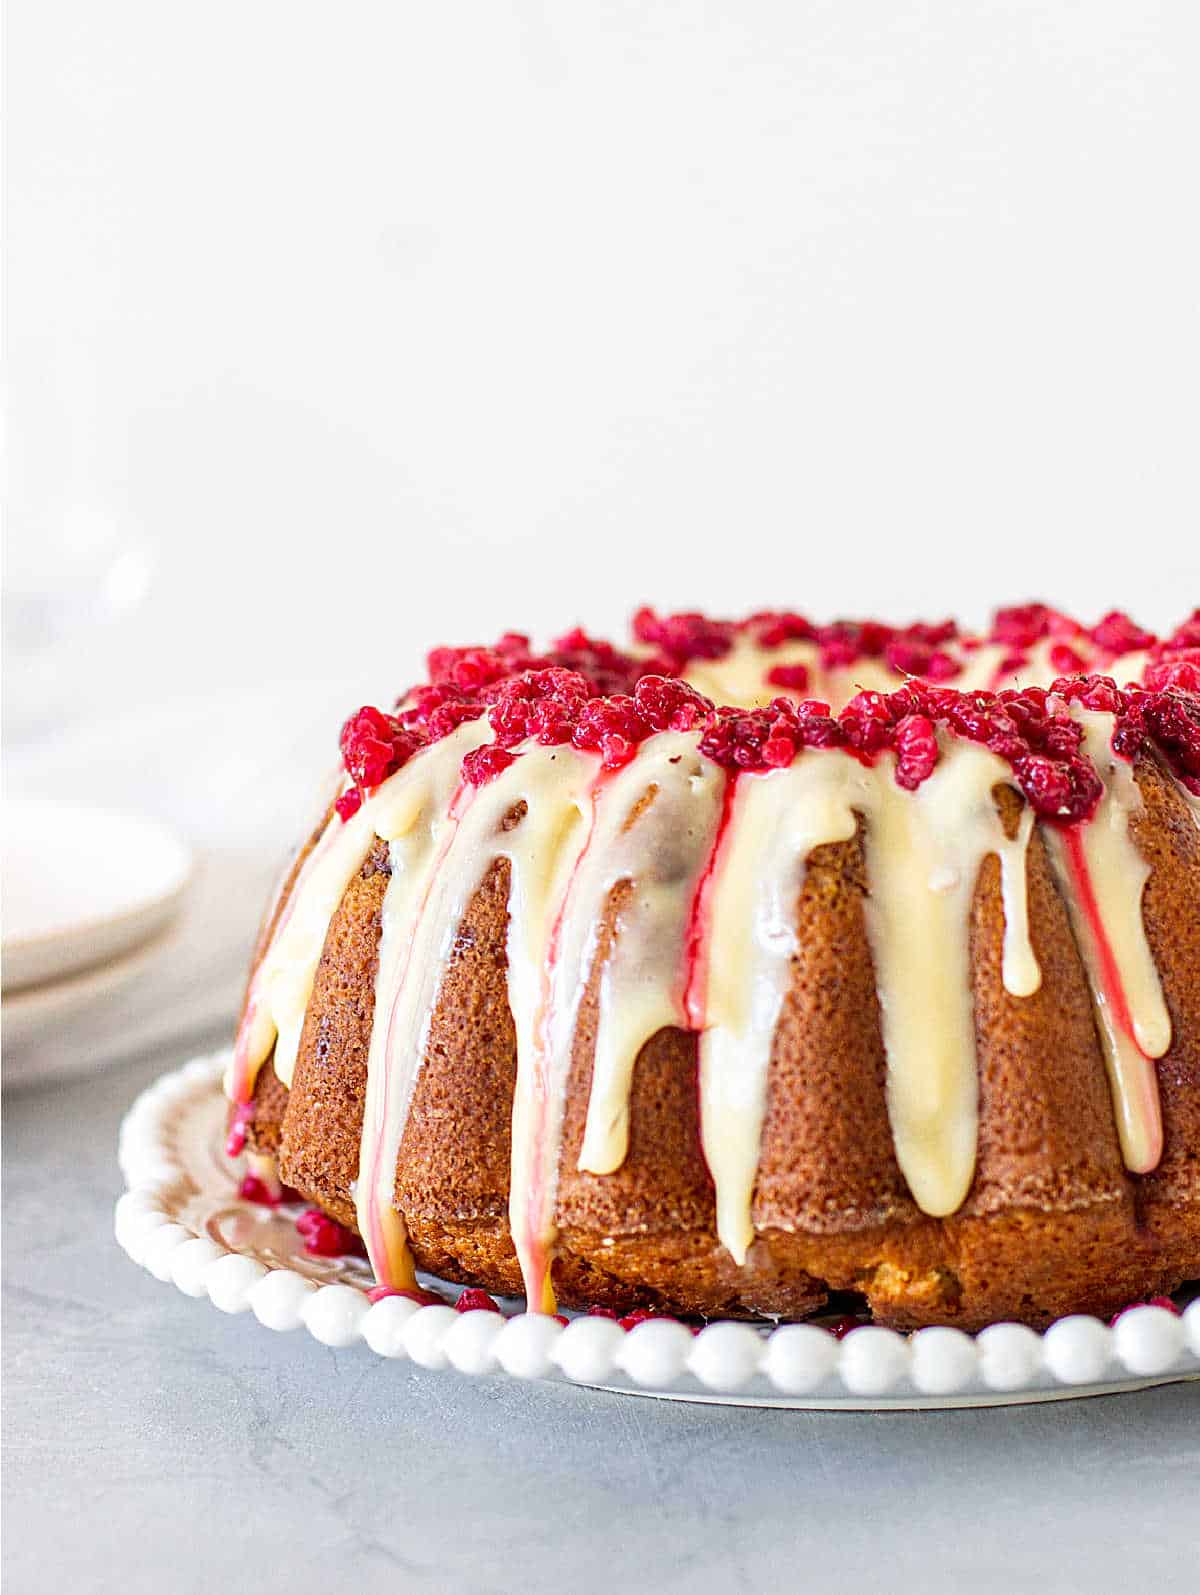 Partial view of white chocolate raspberry bundt cake on white plate, grey background